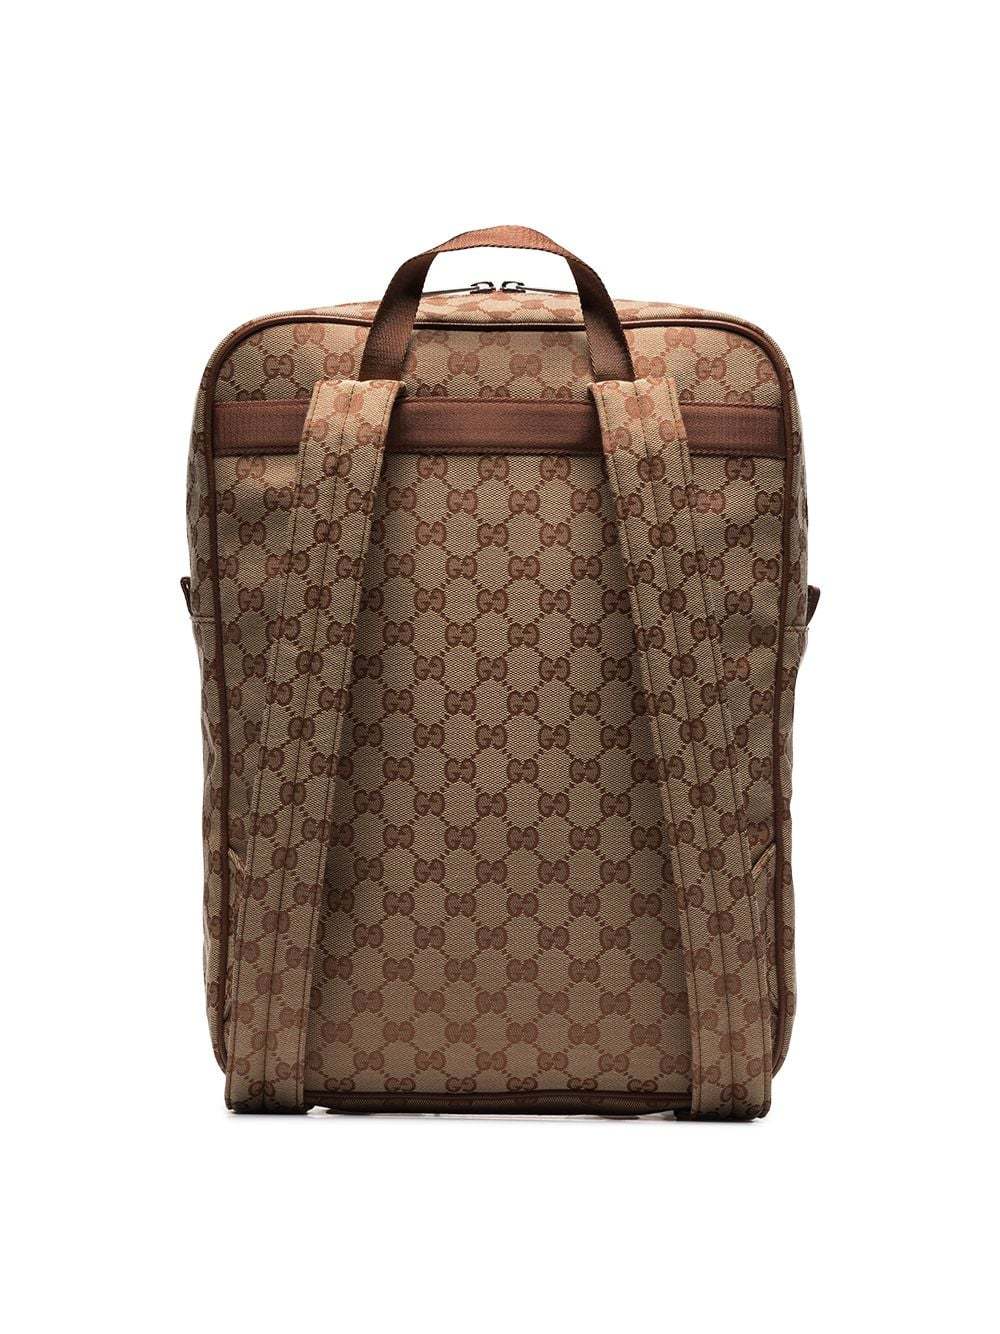 Gucci Brown Ny Yankees Patch Medium Canvas Backpack, $1,450, farfetch.com